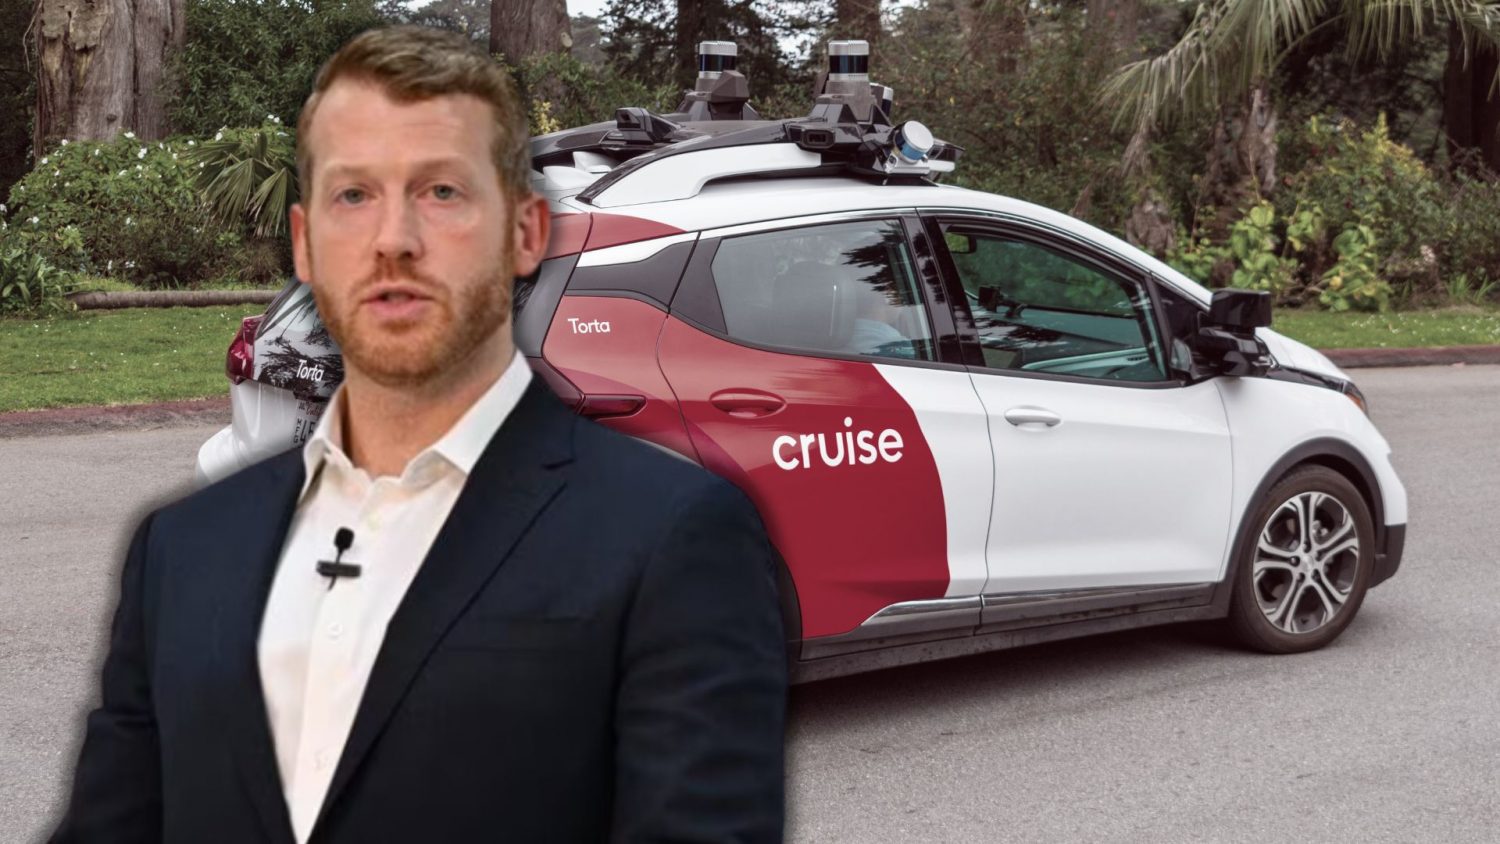 Following a series of safety-related investigations, the CEO and co-founder of General Motors' robotaxi division Cruise, Kyle Vogt, announced his resignation on November 19.